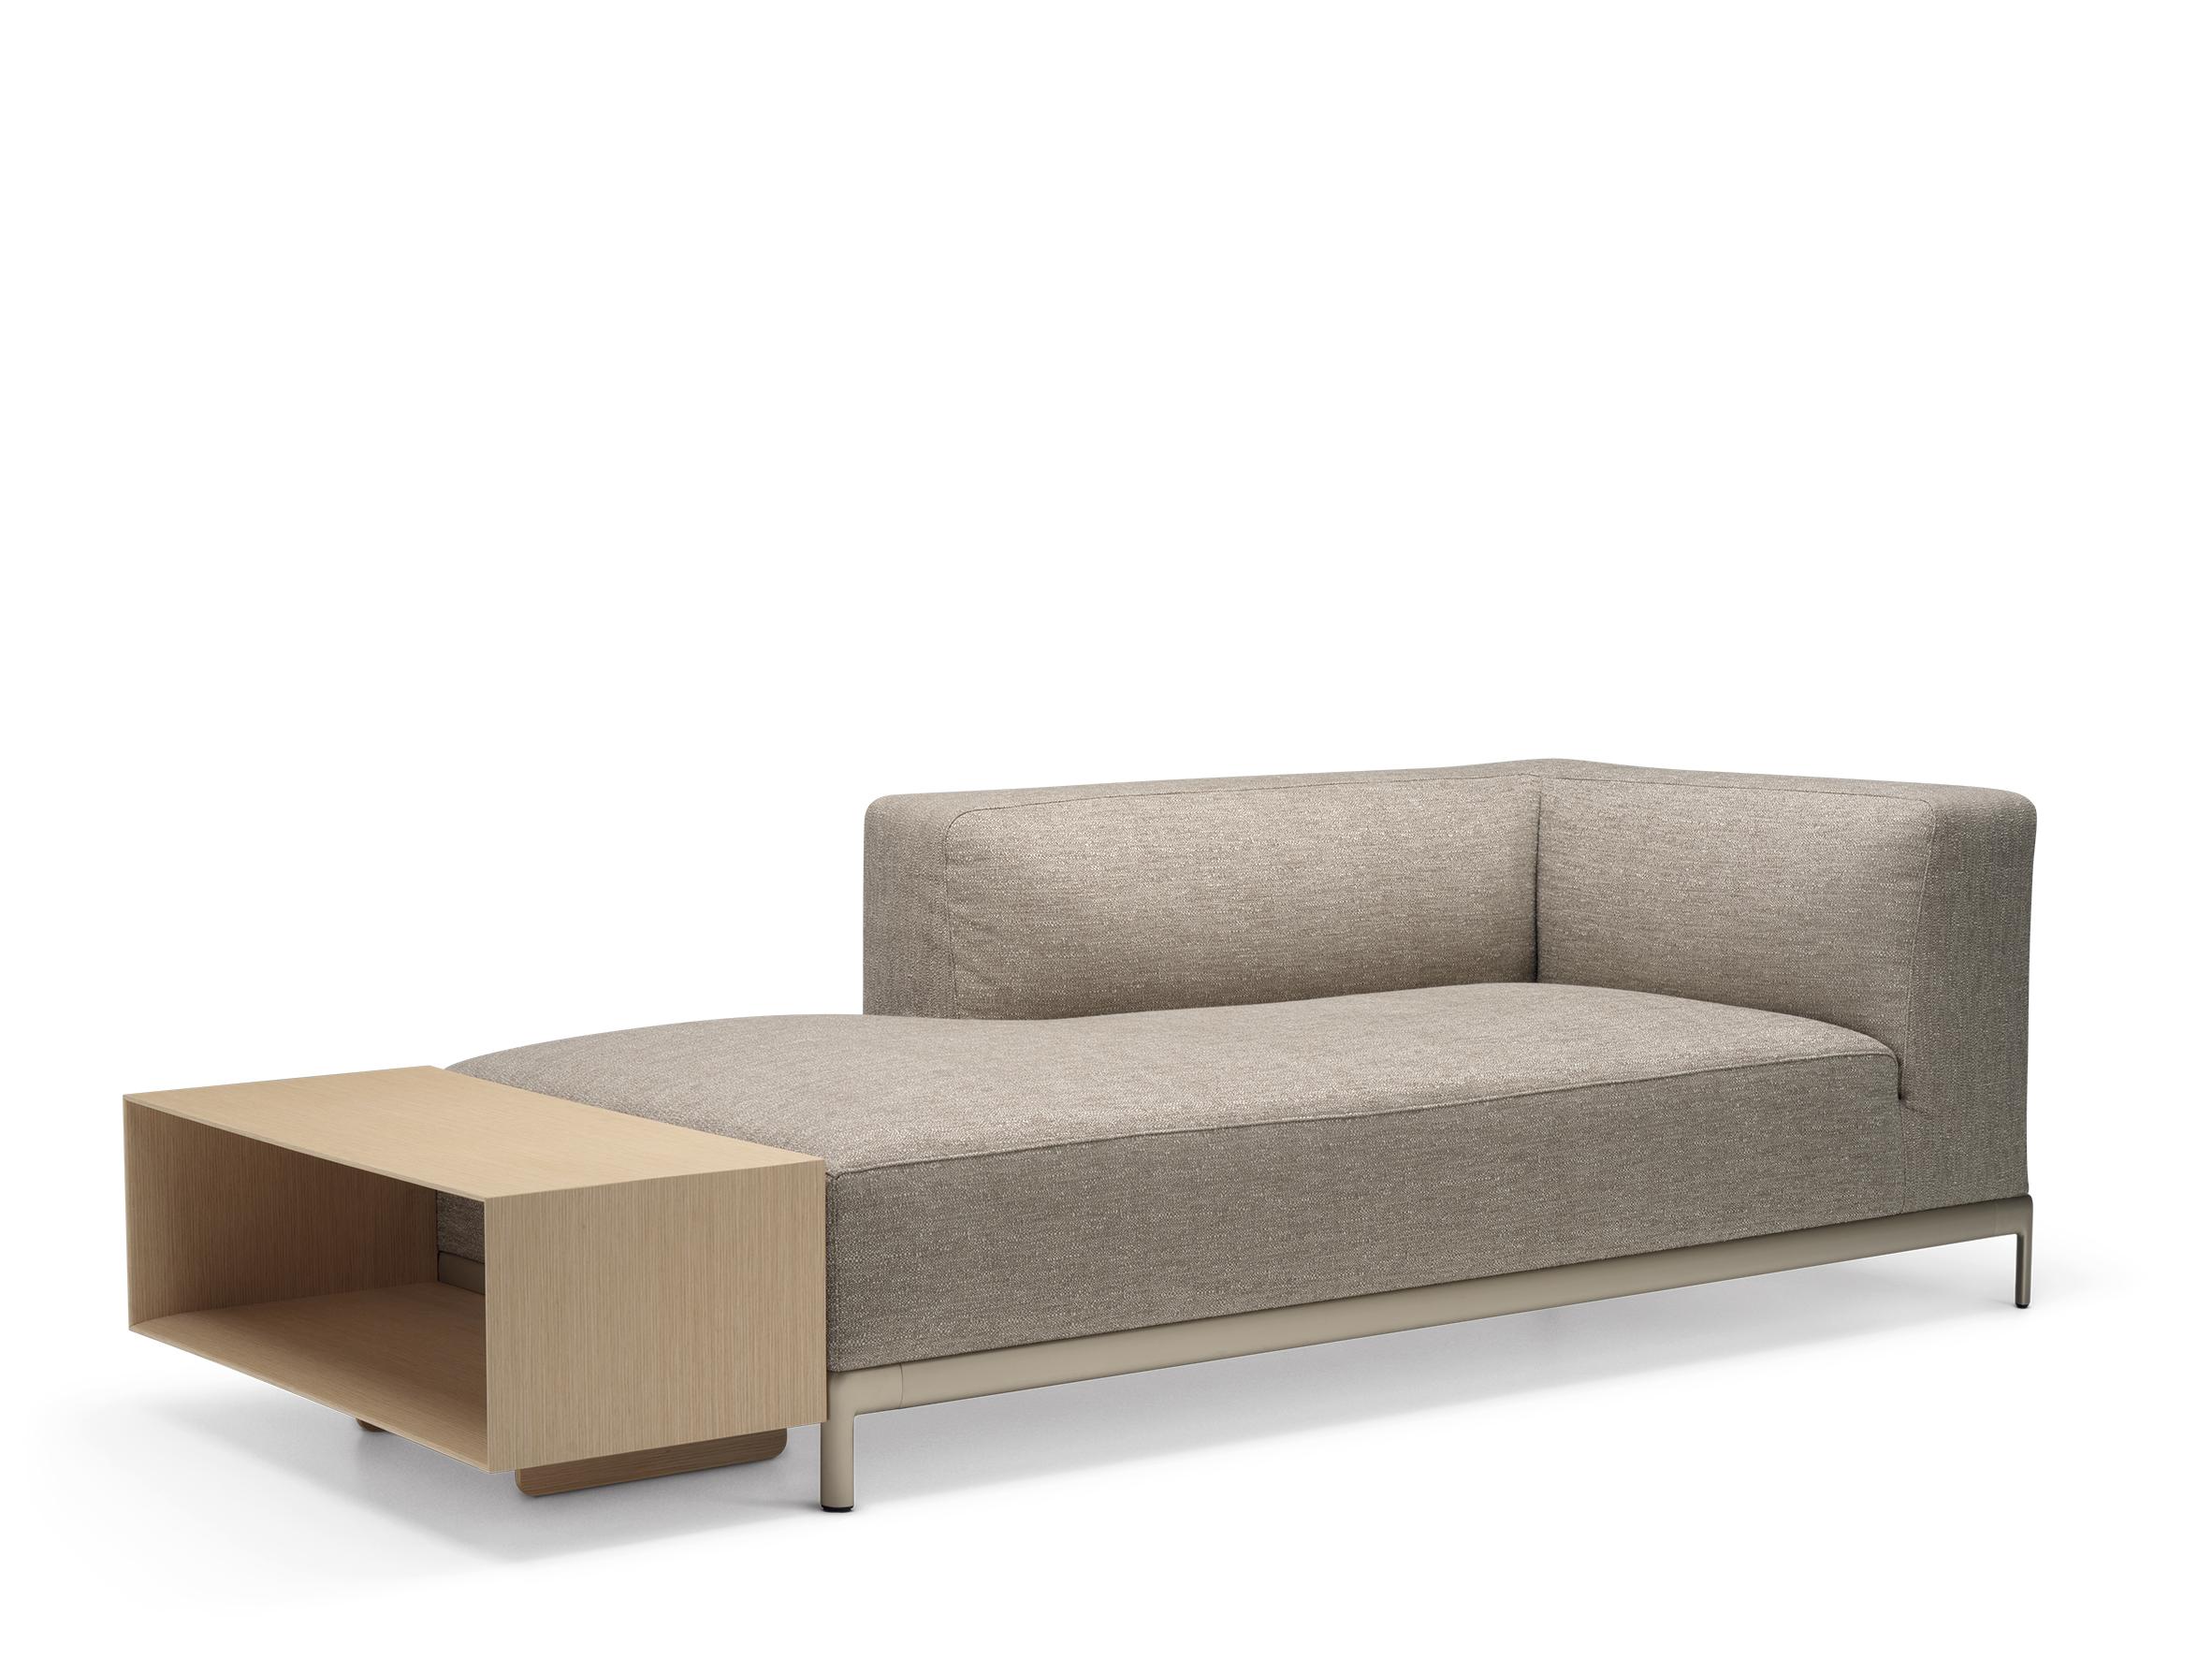 Alias P38 + P54 AluZen Angular Sofa with Box in Brown & Anodized Gold Frame by Ludovica+Roberto Palomba

Modular corner element with structure in lacquered or polished aluminium.Seat, back and armrest with removable cover in fabric or